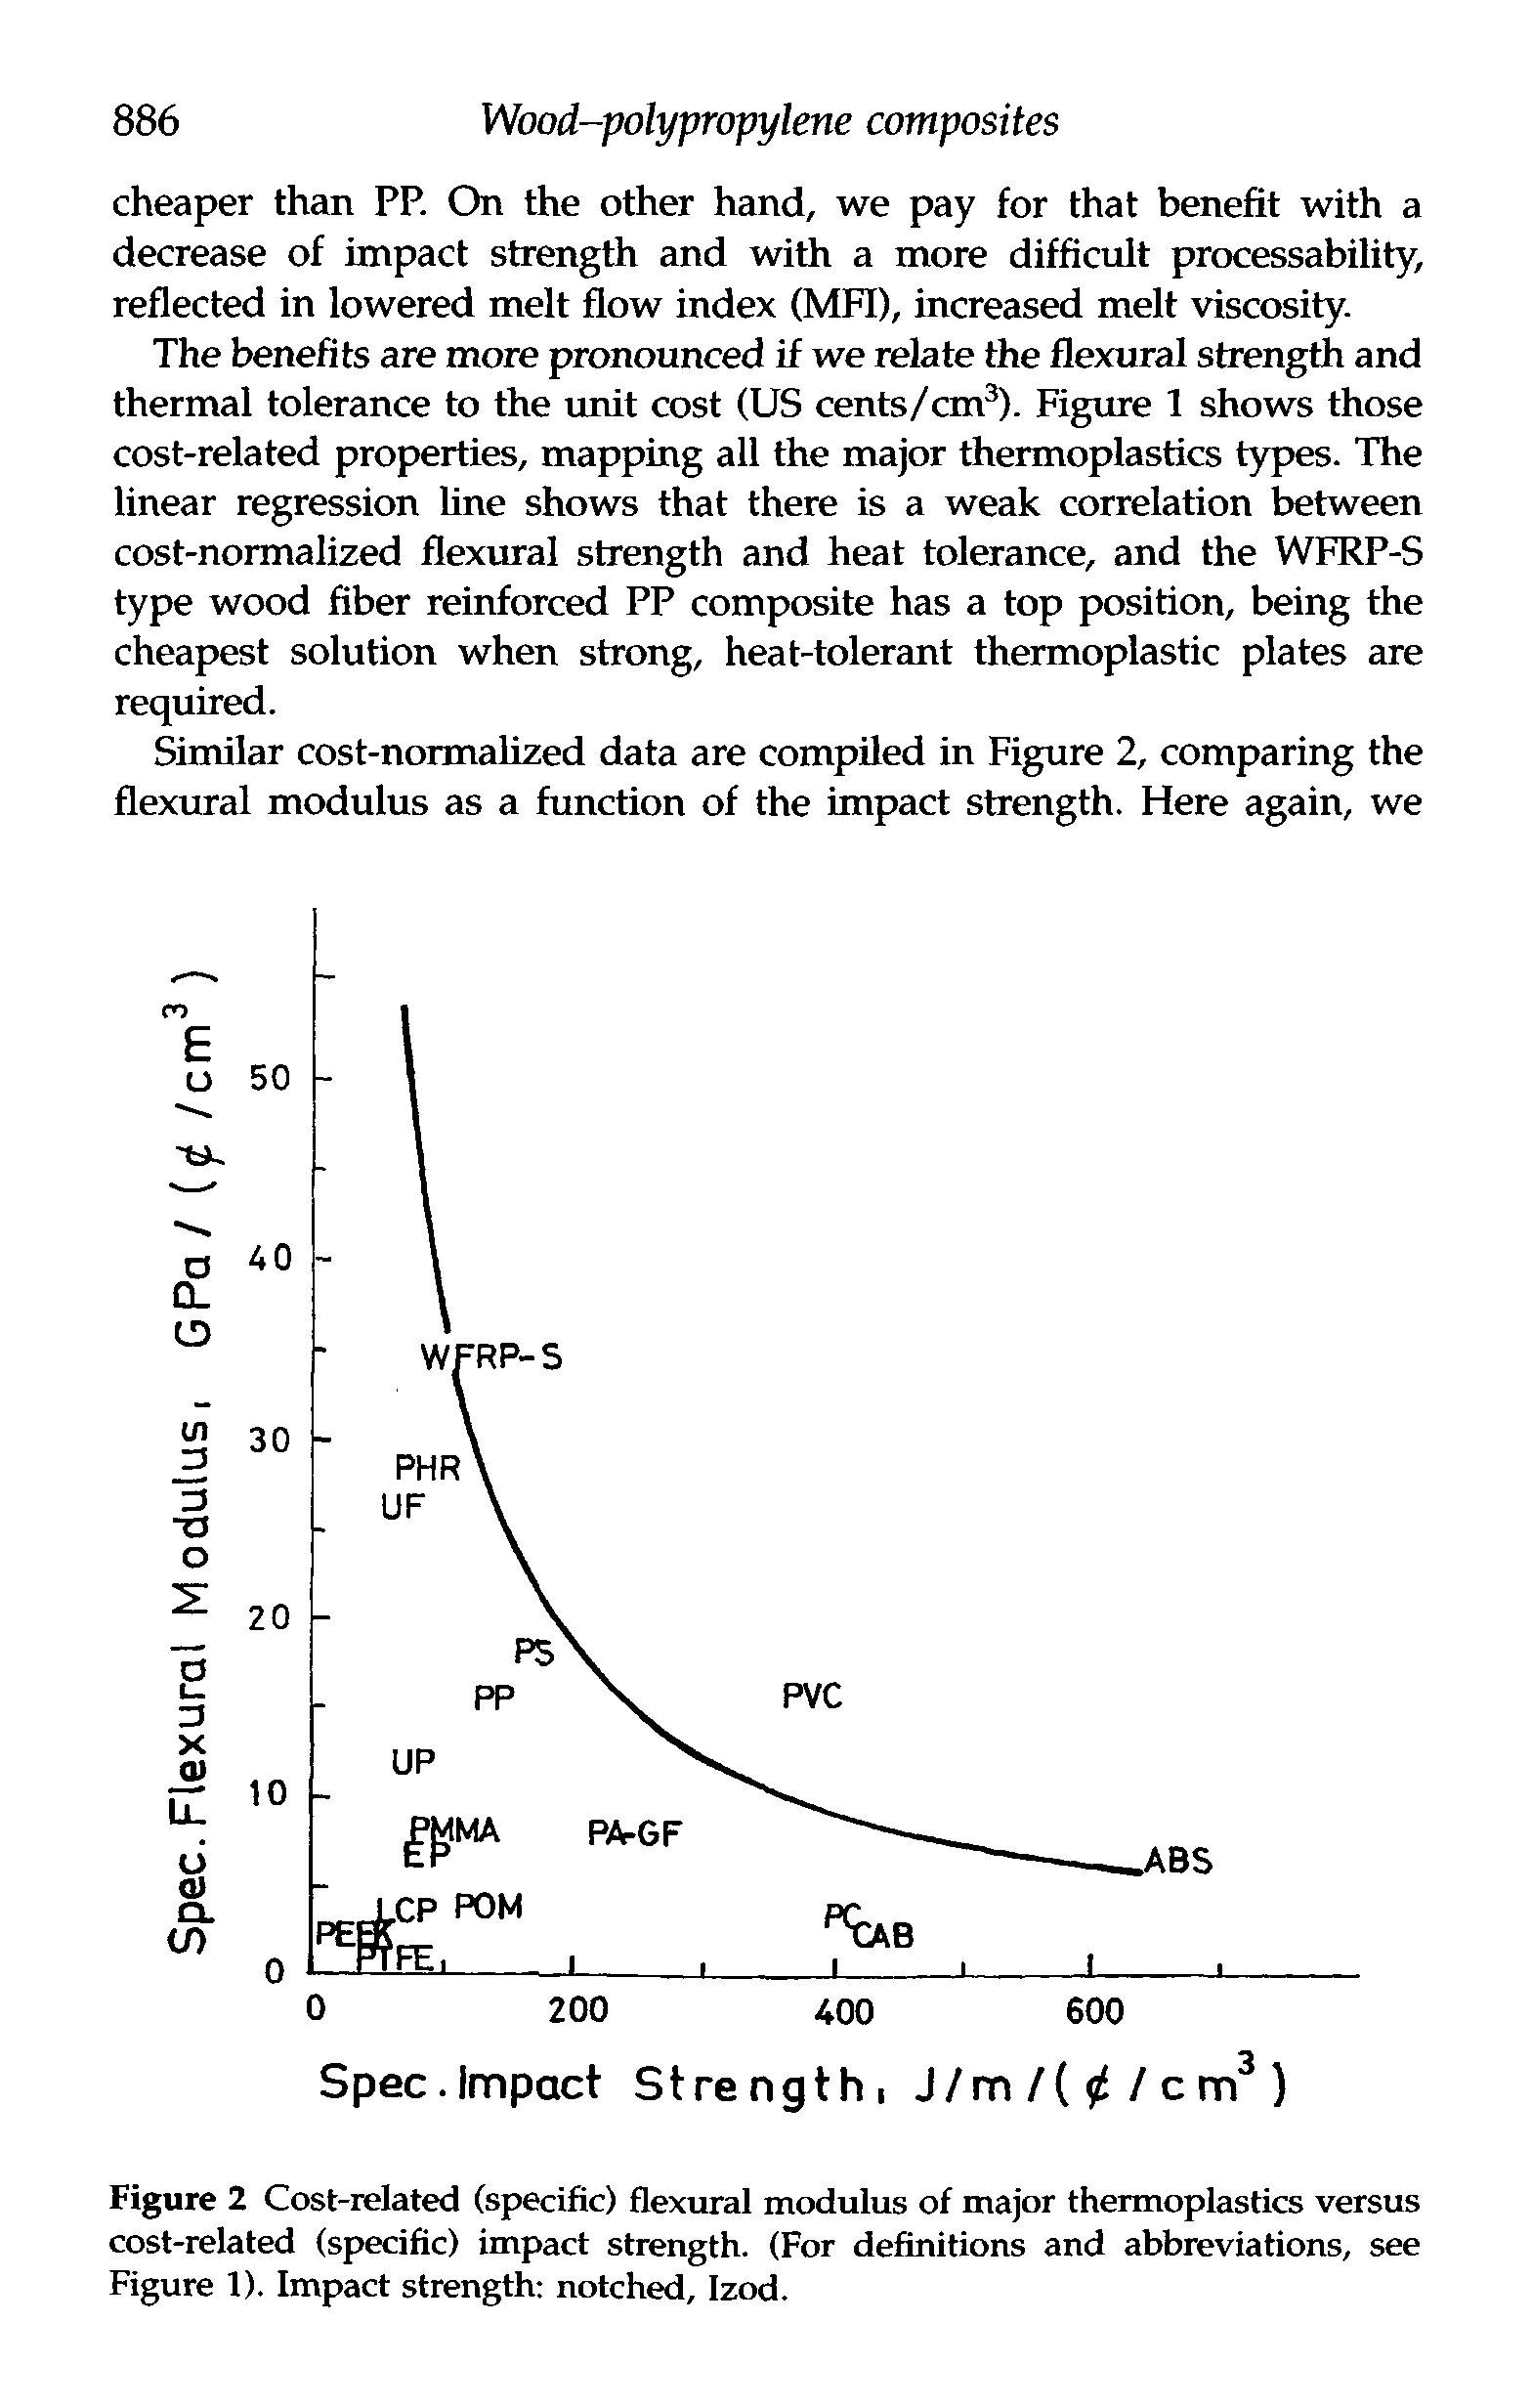 Figure 2 Cost-related (specific) flexural modulus of major thermoplastics versus cost-related (specific) impact strength. (For definitions and abbreviations, see Figure 1). Impact strength notched, Izod.